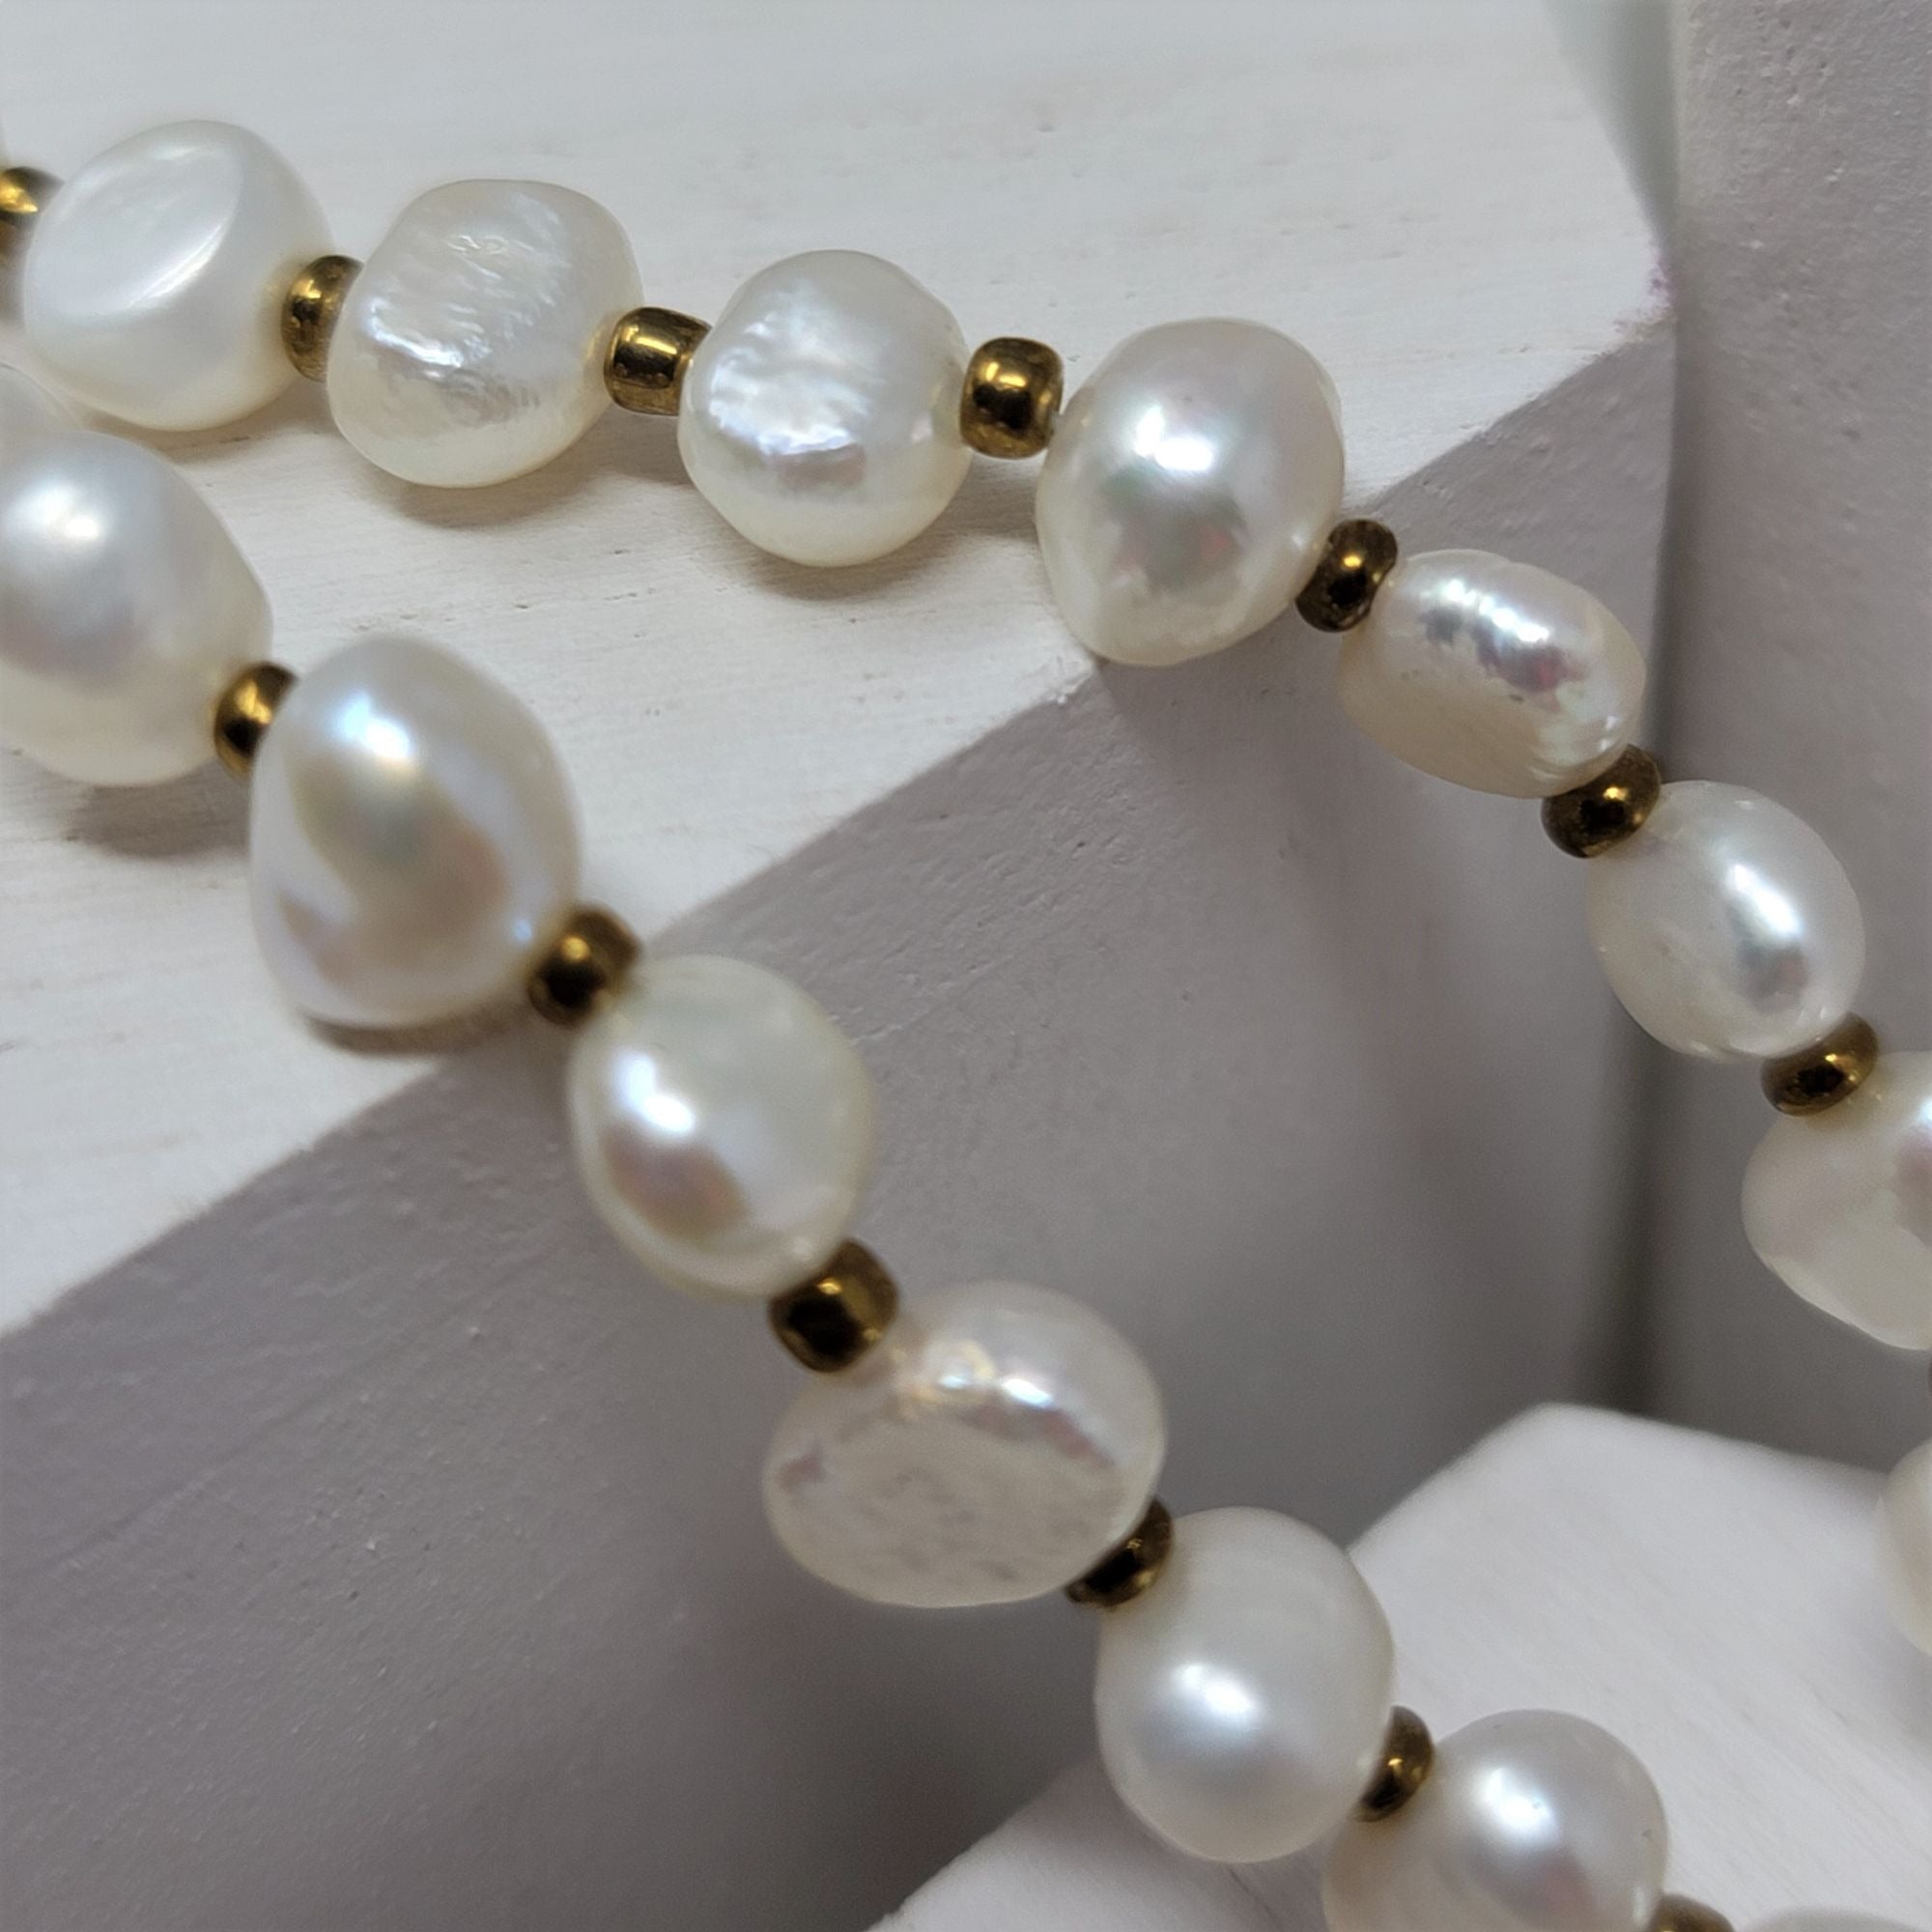 Modern Necklace Freshwater Pearls & Glass Beads